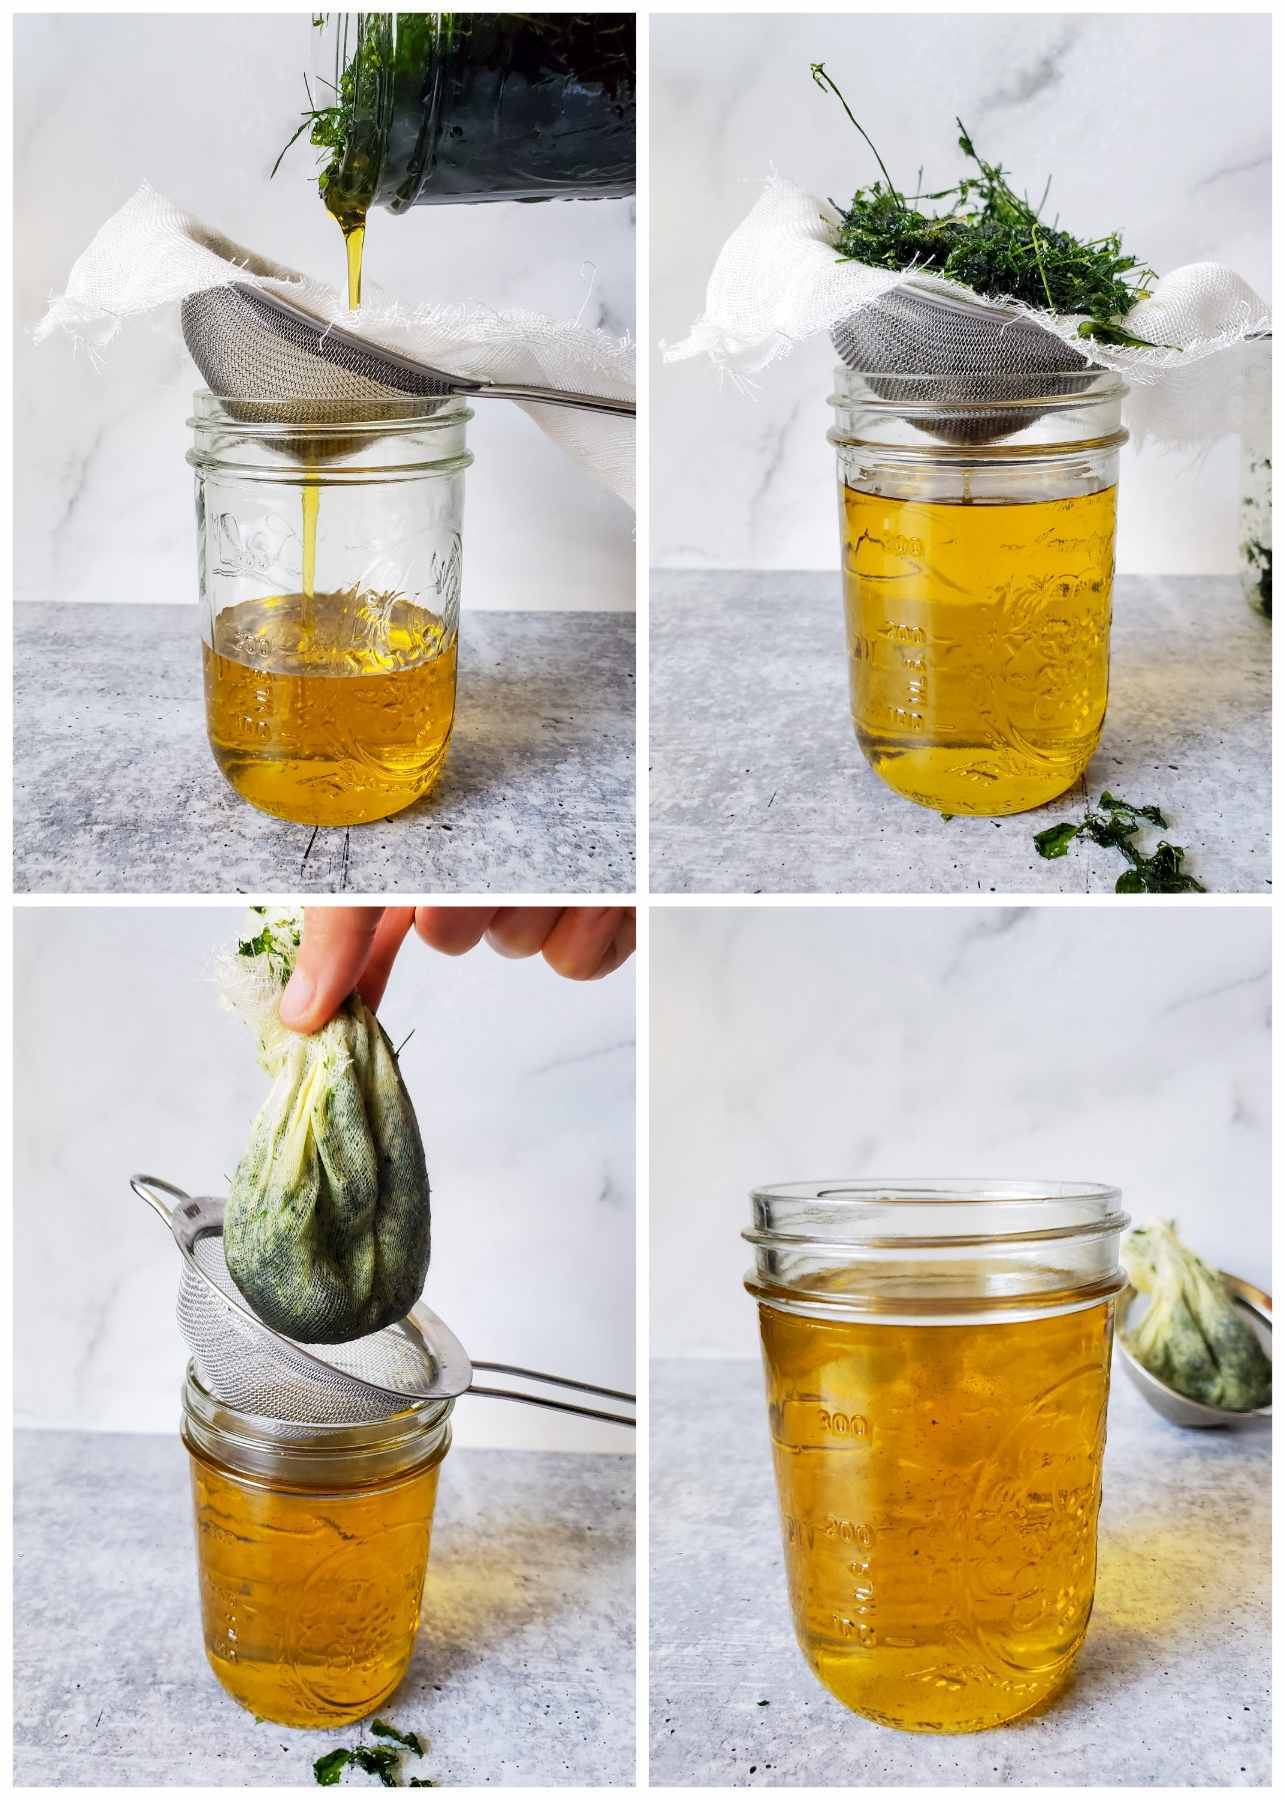 A four way image collage, the first image shows a jar with a fine mesh strainer and cheesecloth resting over the top of it while a jar of infused oil is poured into it from above. The second image shows the jar after the infused oil has been strained, the strainer and cheesecloth now contain the infused plant material that was strained out. The third image shows a hand holding the cheesecloth as one would a tea bag, it has been squeezed to render out any oil that was left within the plant material. The fourth image shows the jar of infused oil, the cheesecloth of plant material is in the background. 